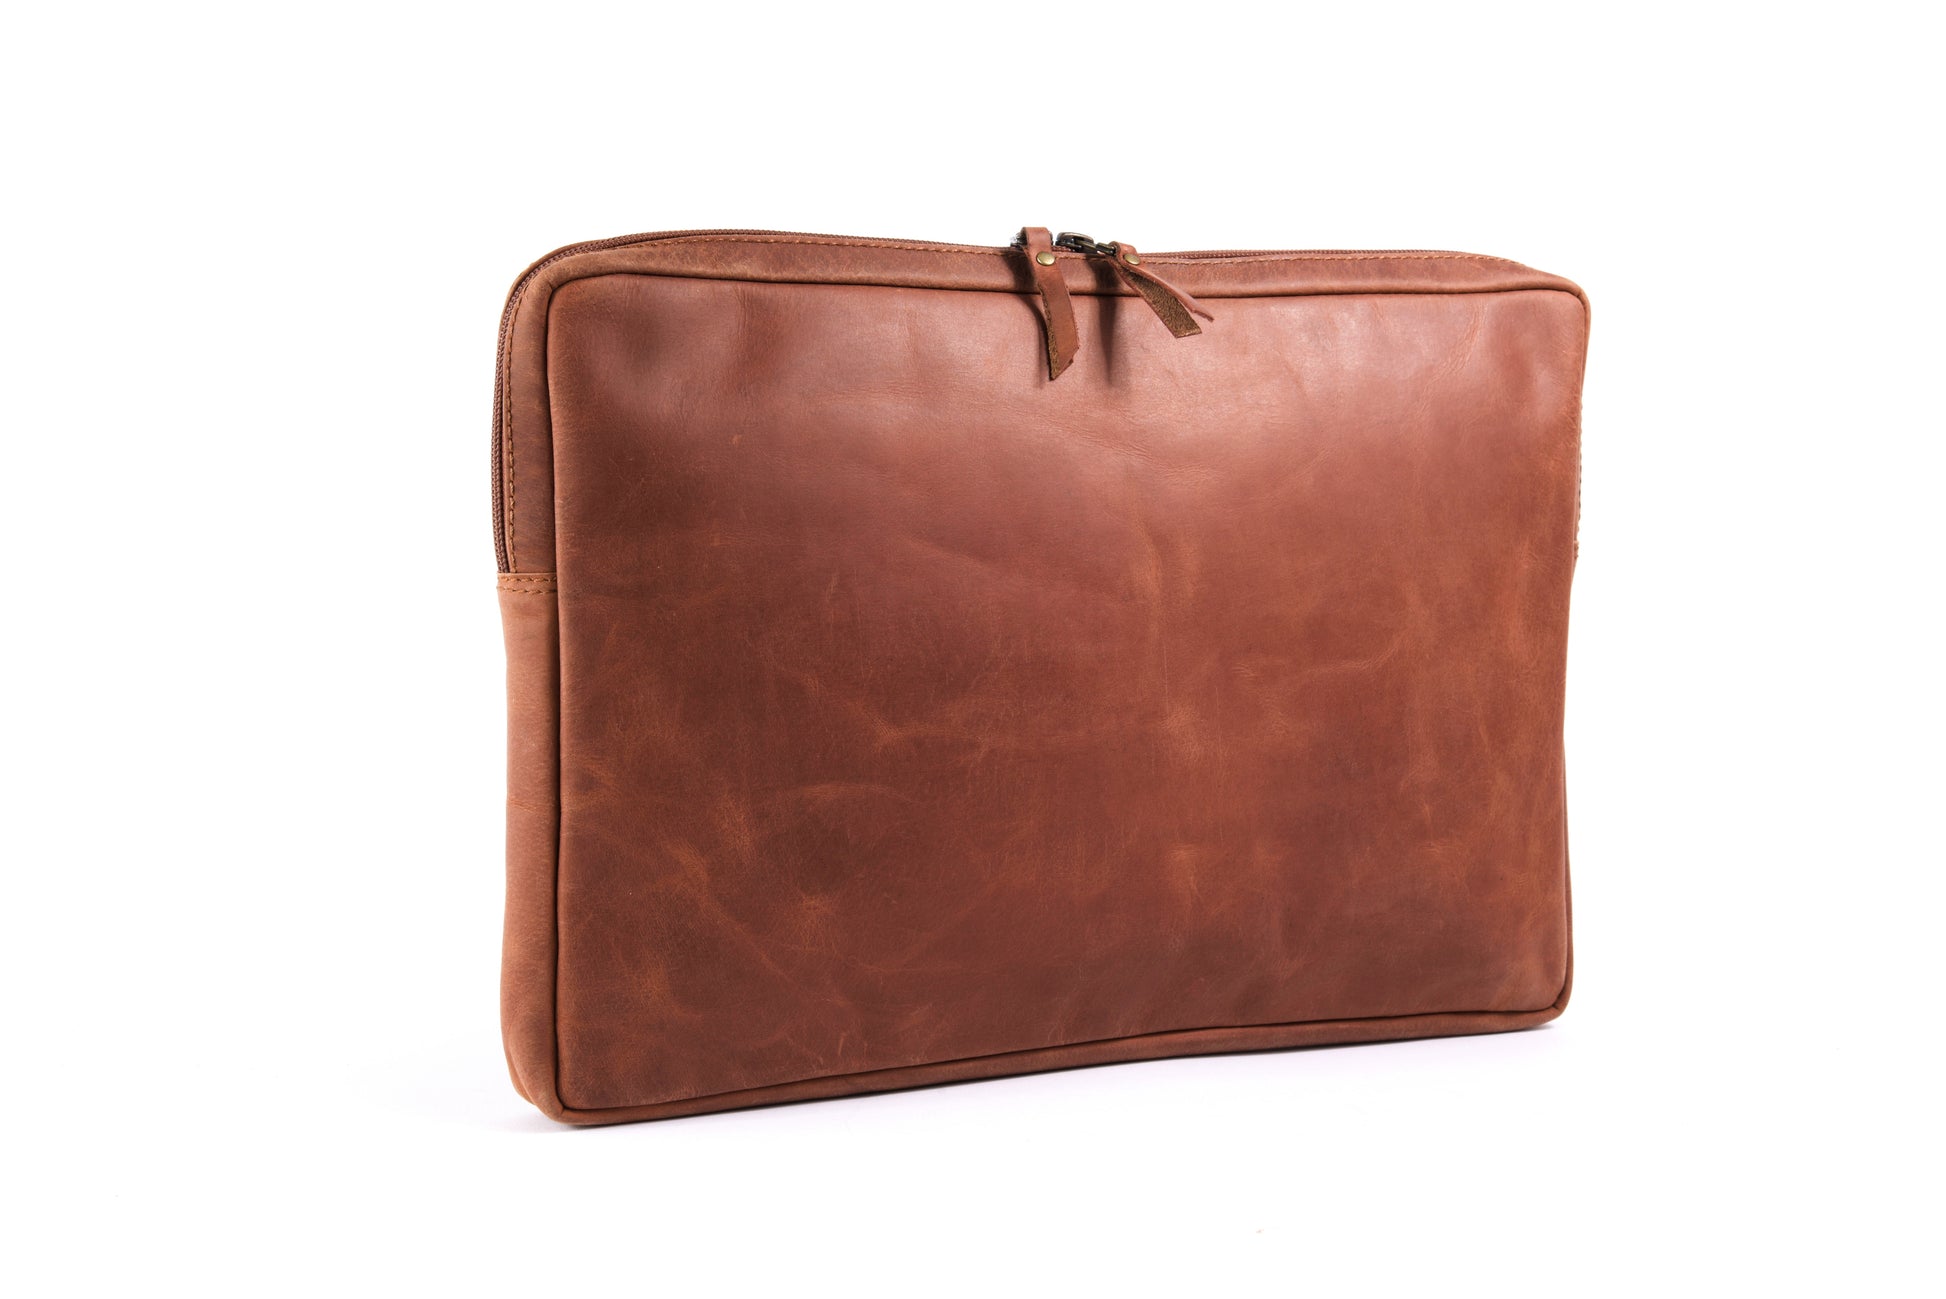 Buy Leather Laptop Sleeve canada, Leather Laptop Bag